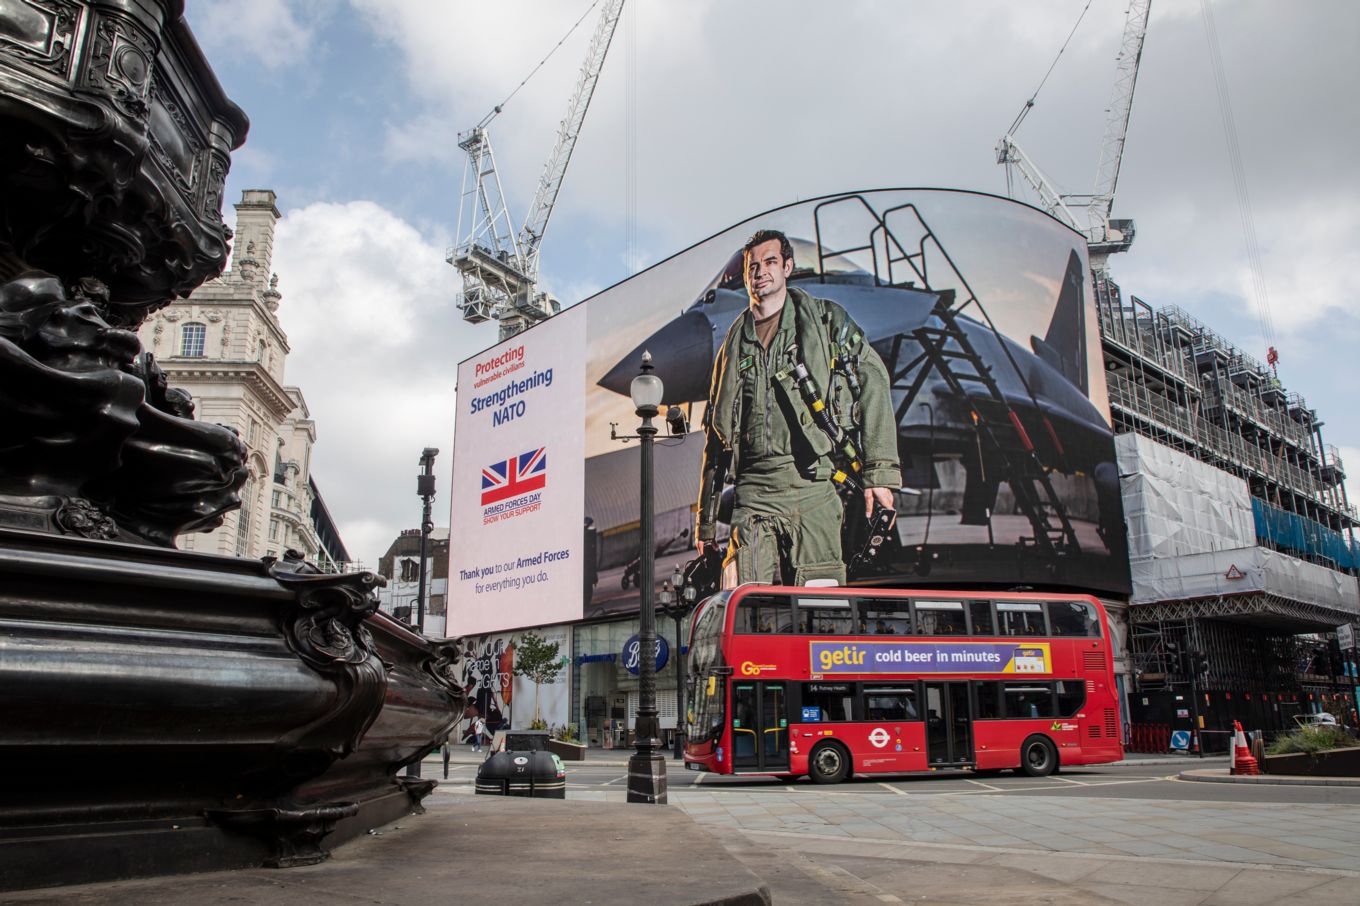 Image shows an RAF pilot on the advertisement screen at Piccadilly Circus in London.